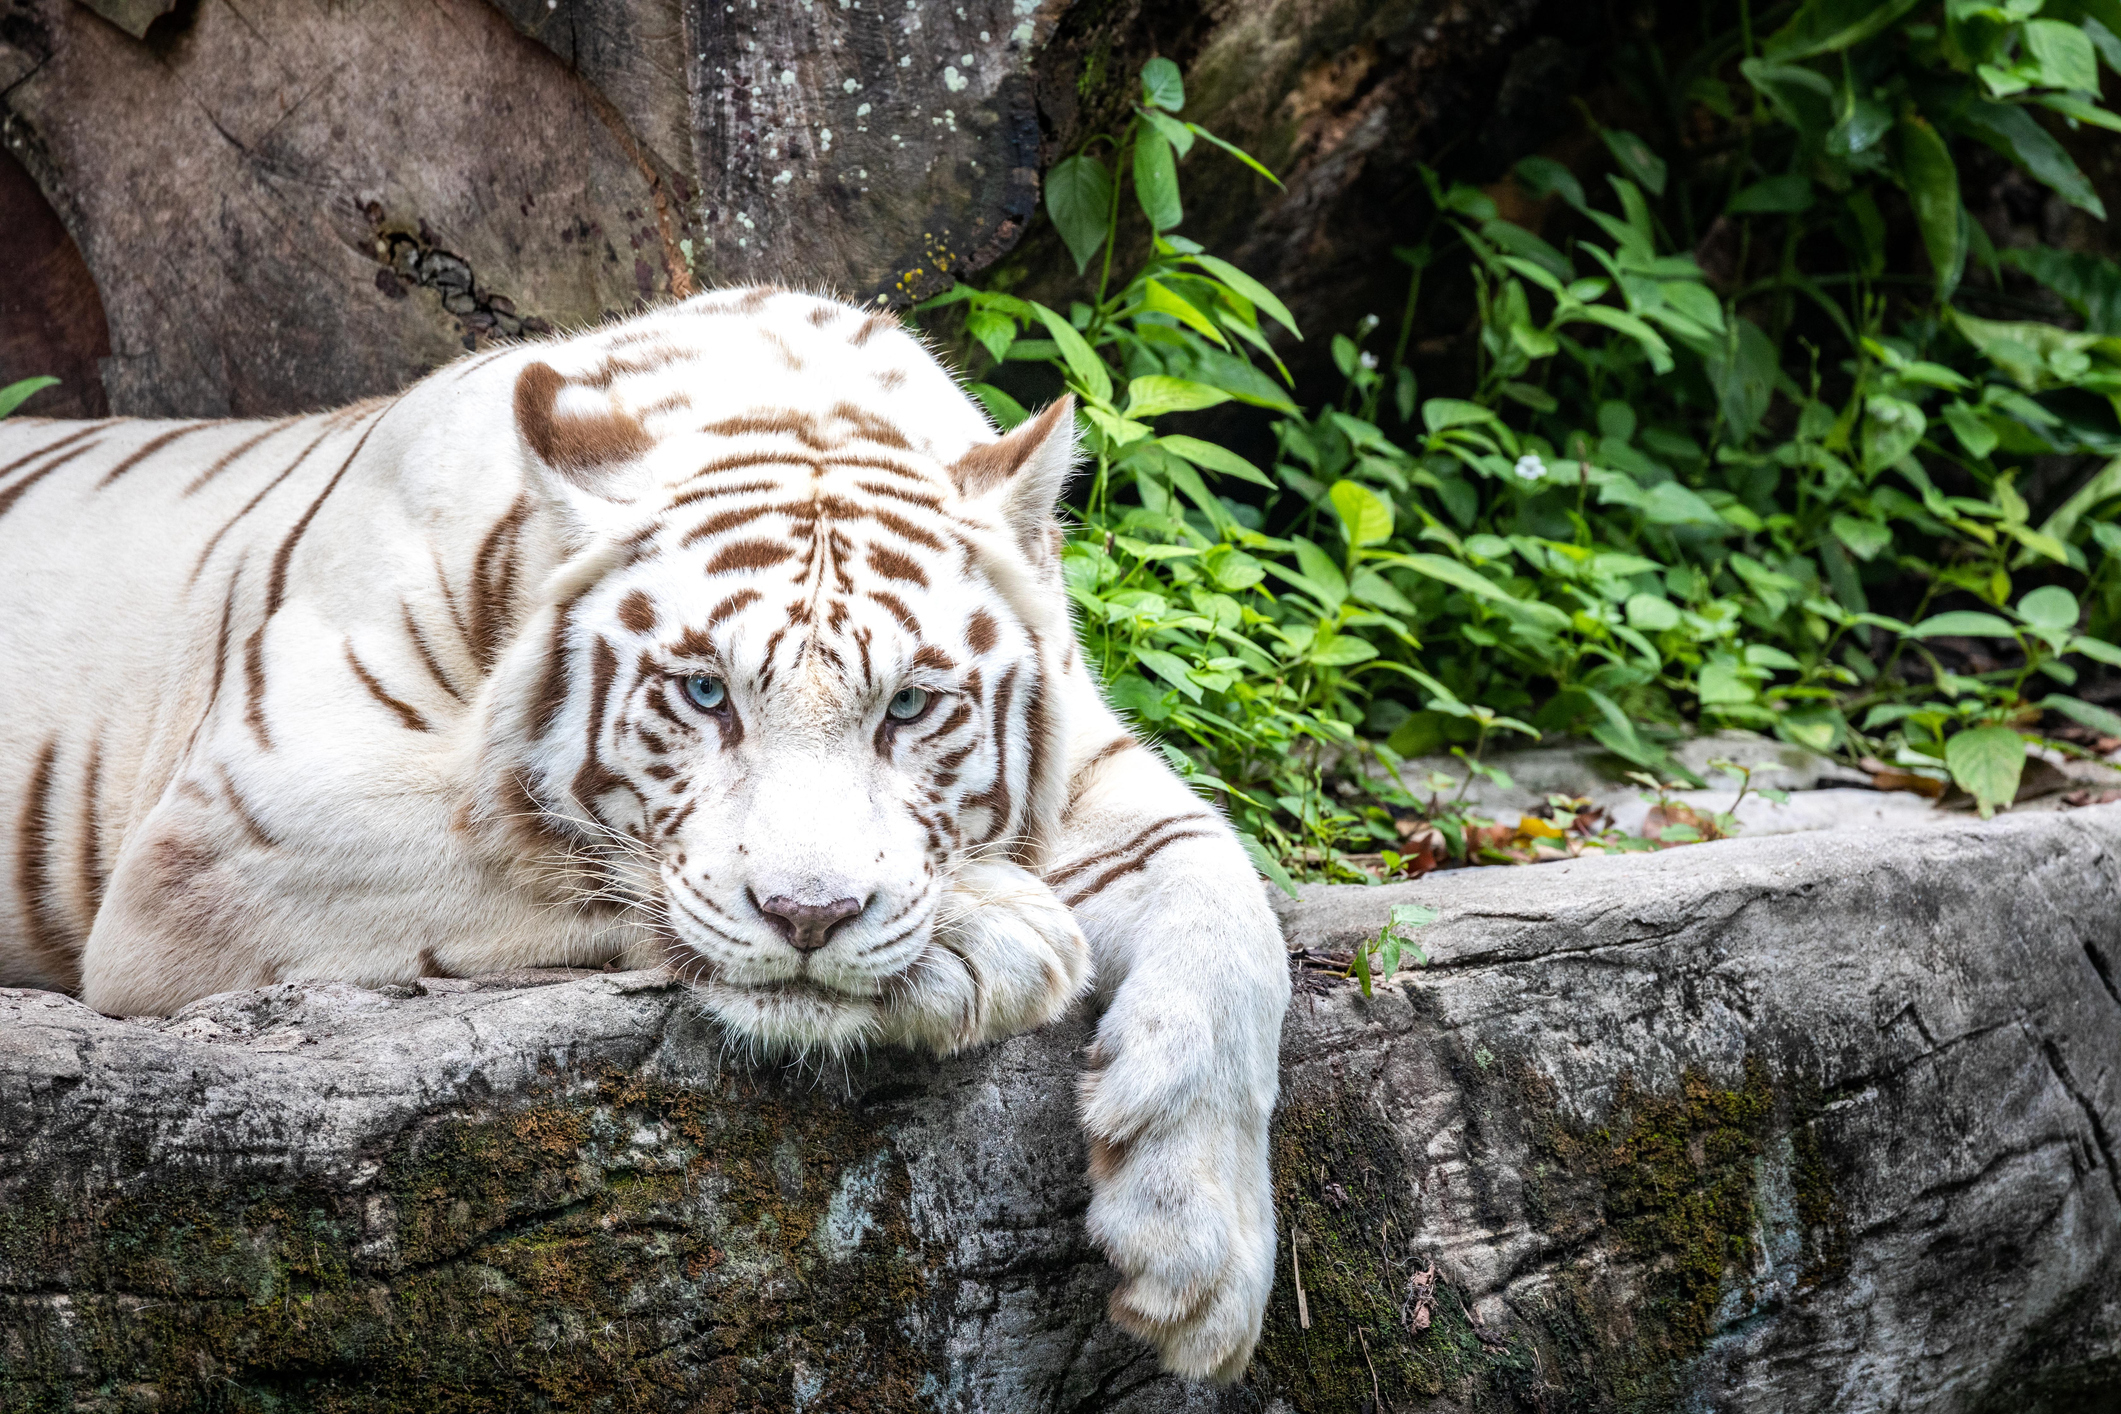 White tiger resting on a rock with green foliage in the background